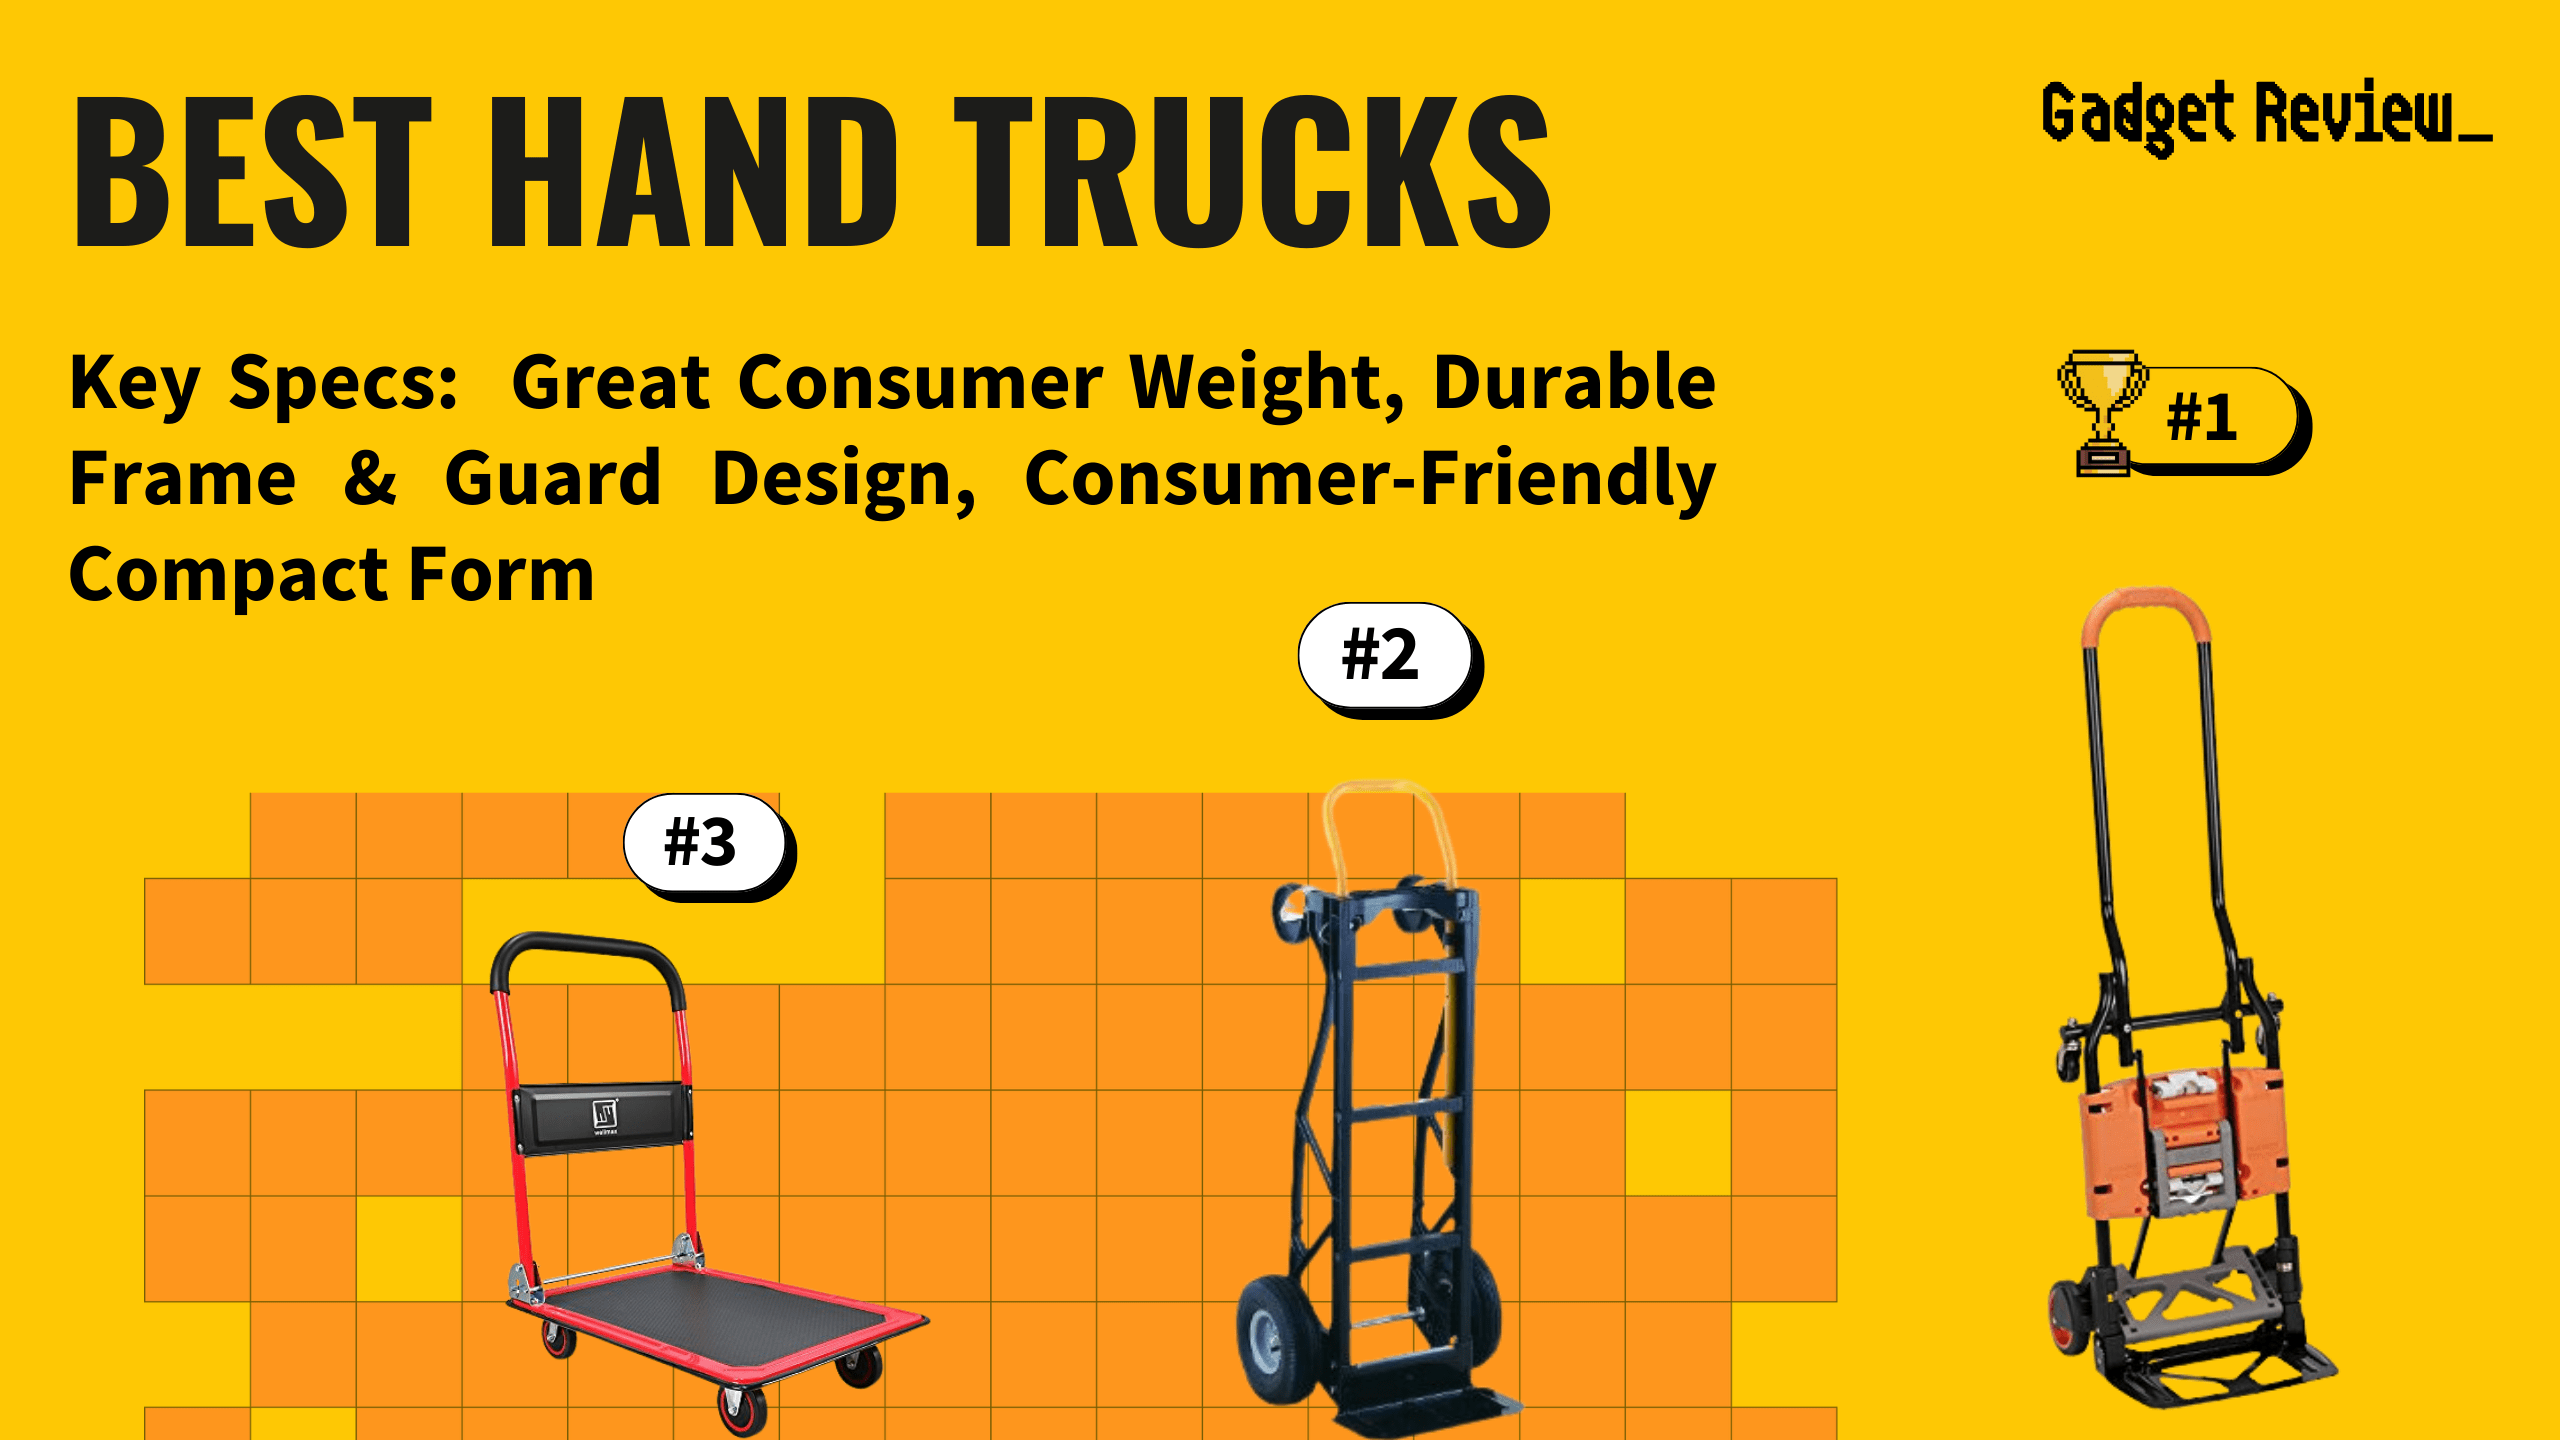 best hand truck featured image that shows the top three best tool models